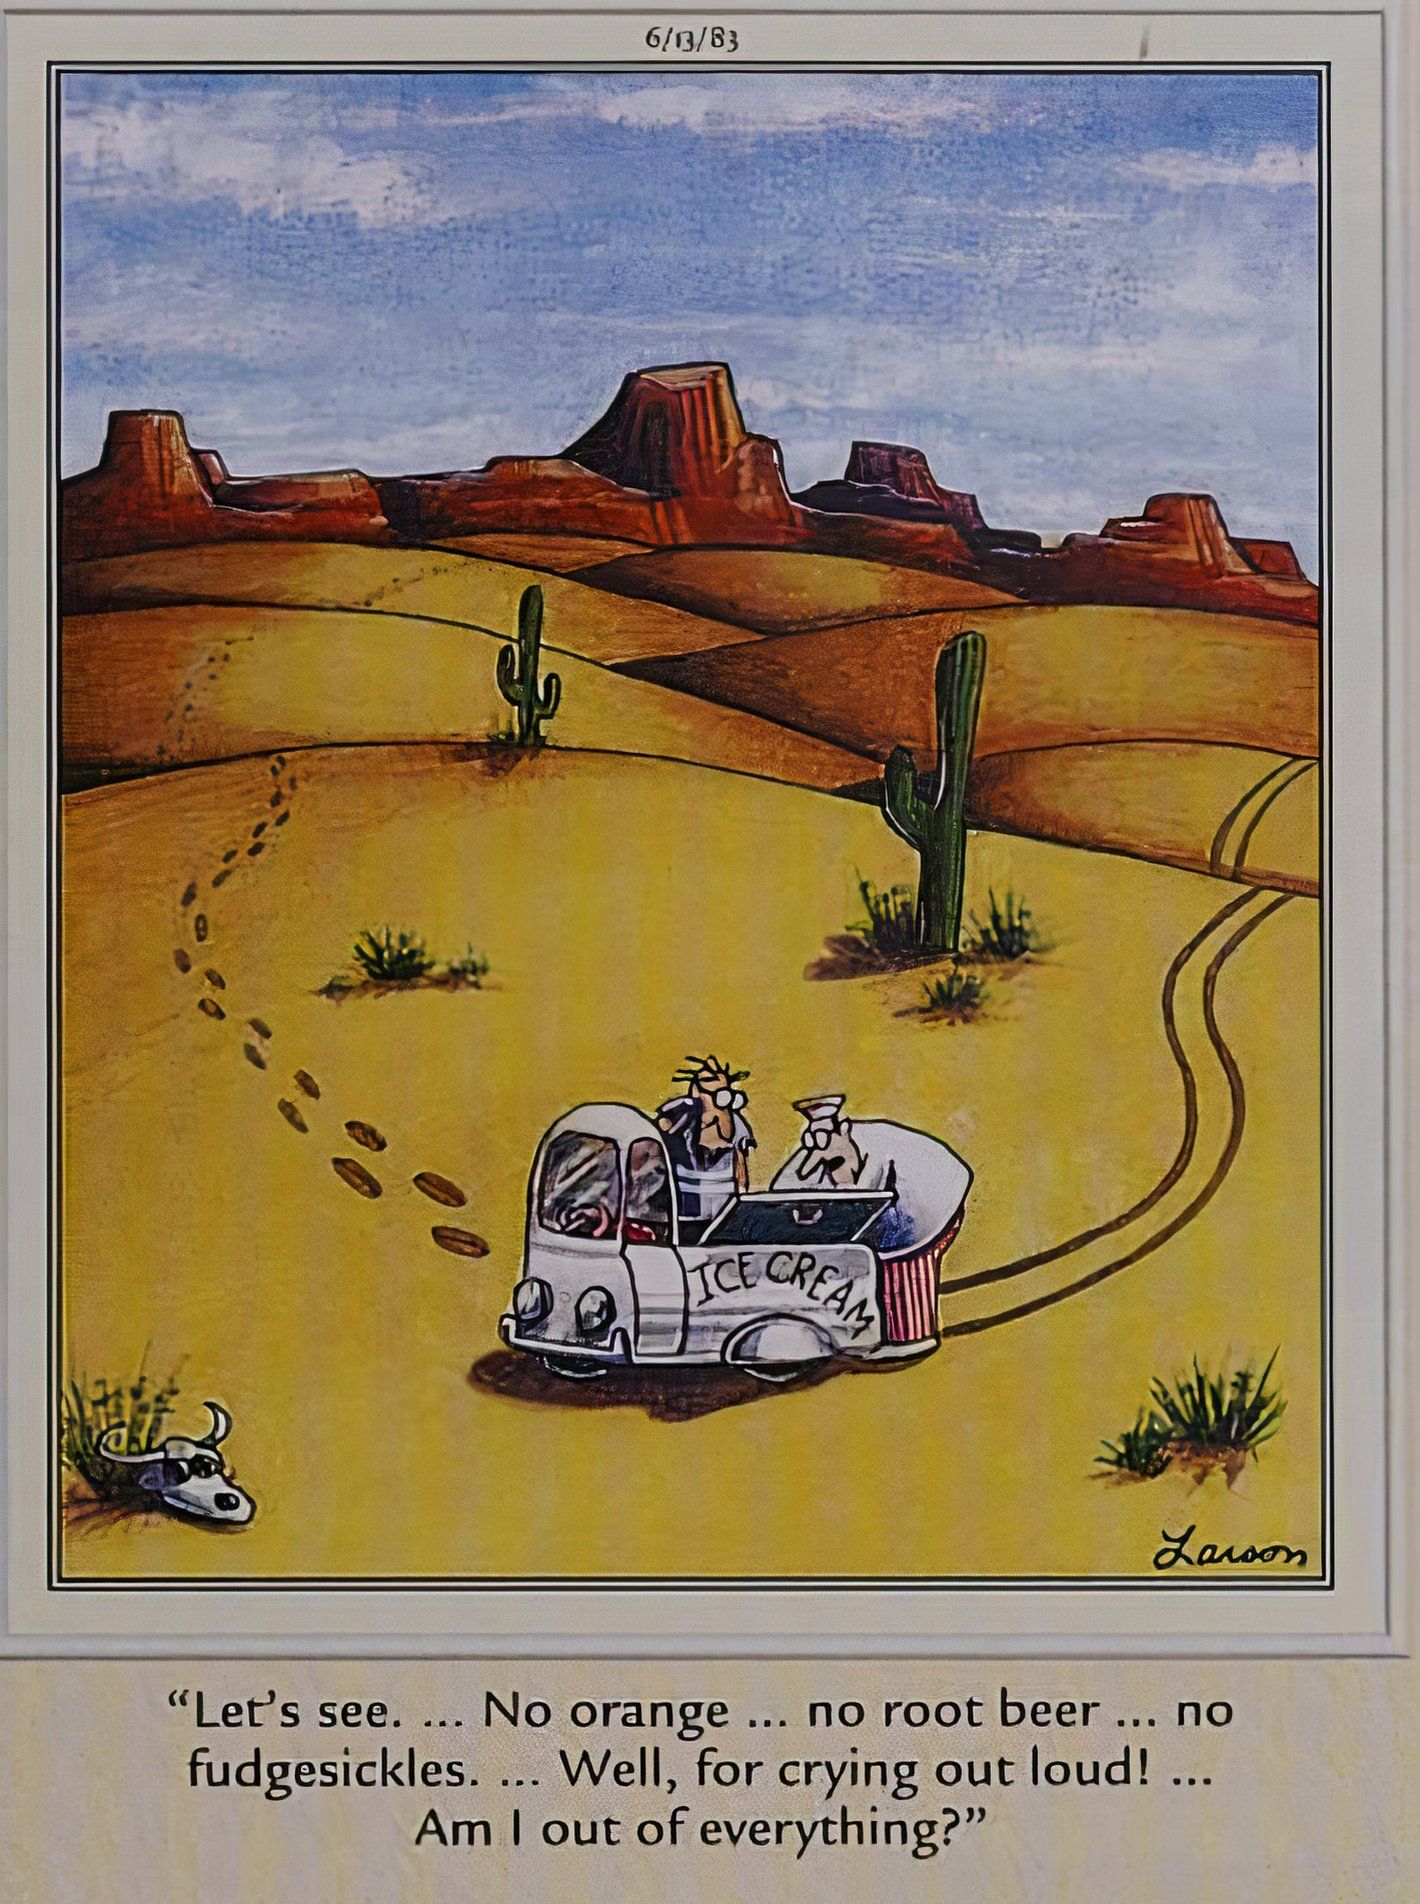 Far Side, ice cream man is out of everything, to dismay of customer wandering desert